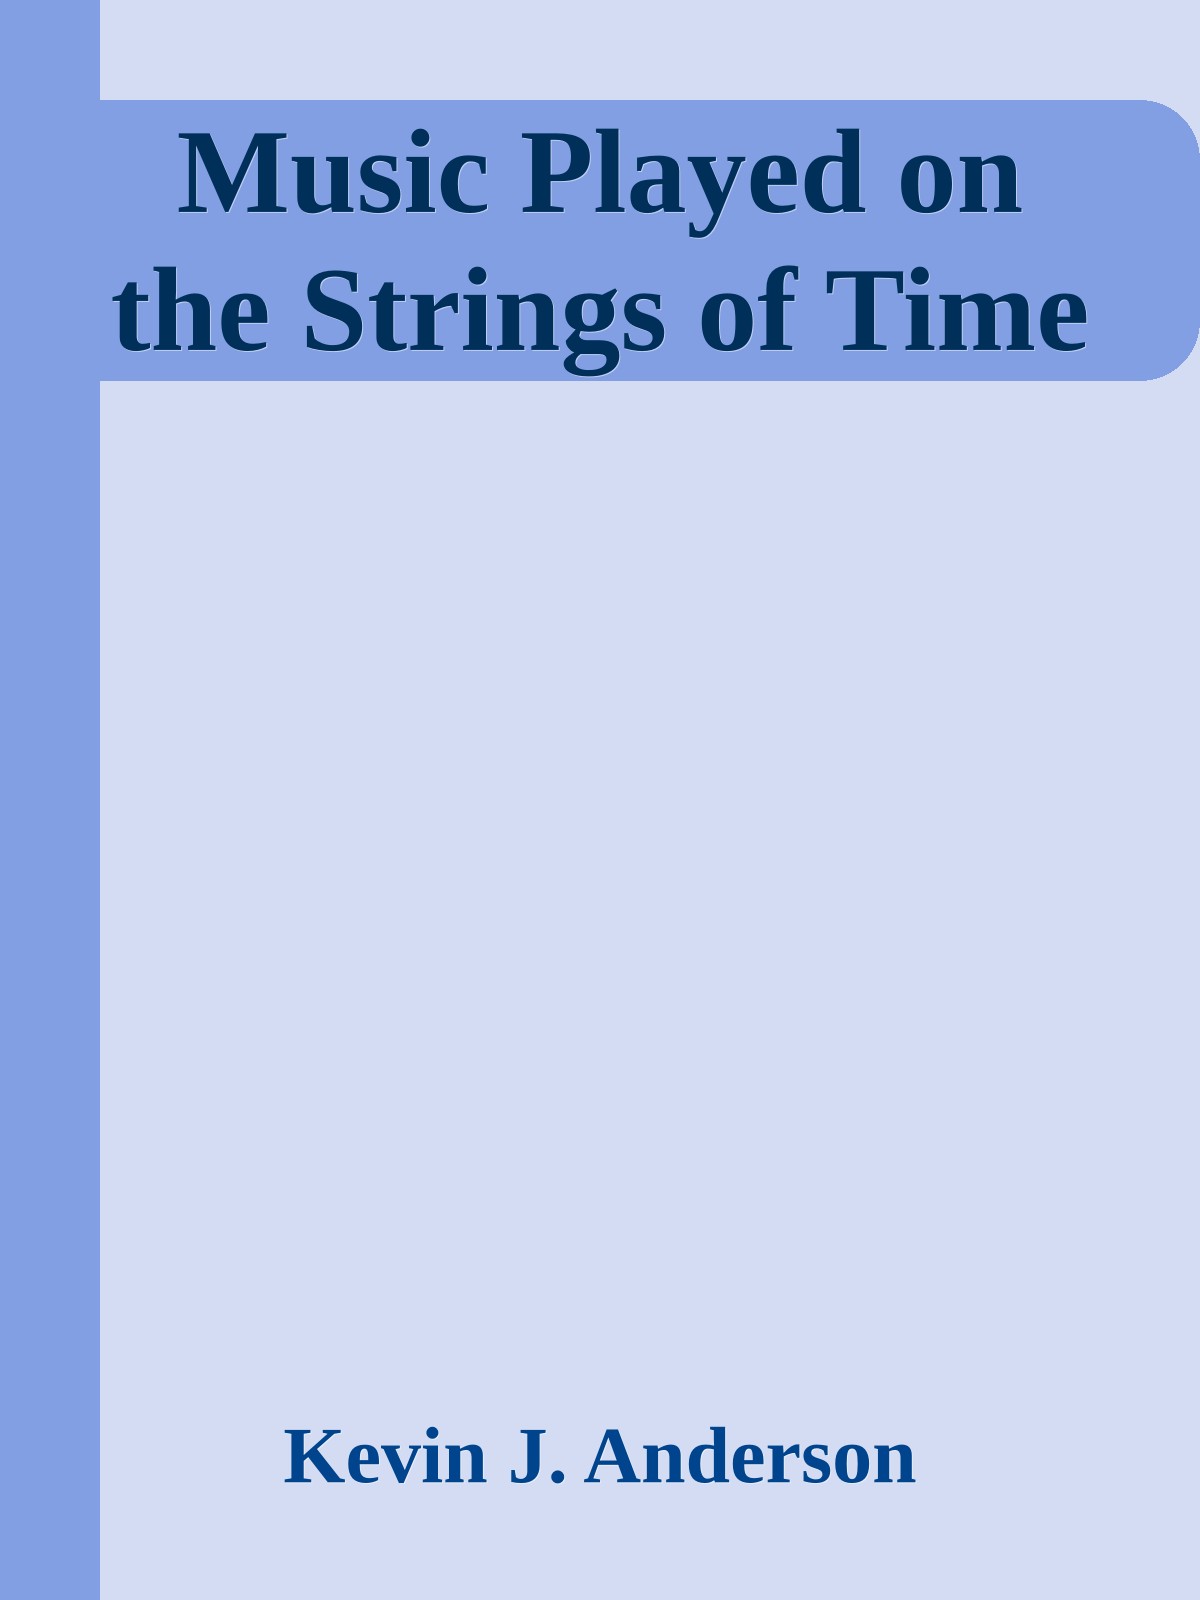 Music Played on the Strings of Time